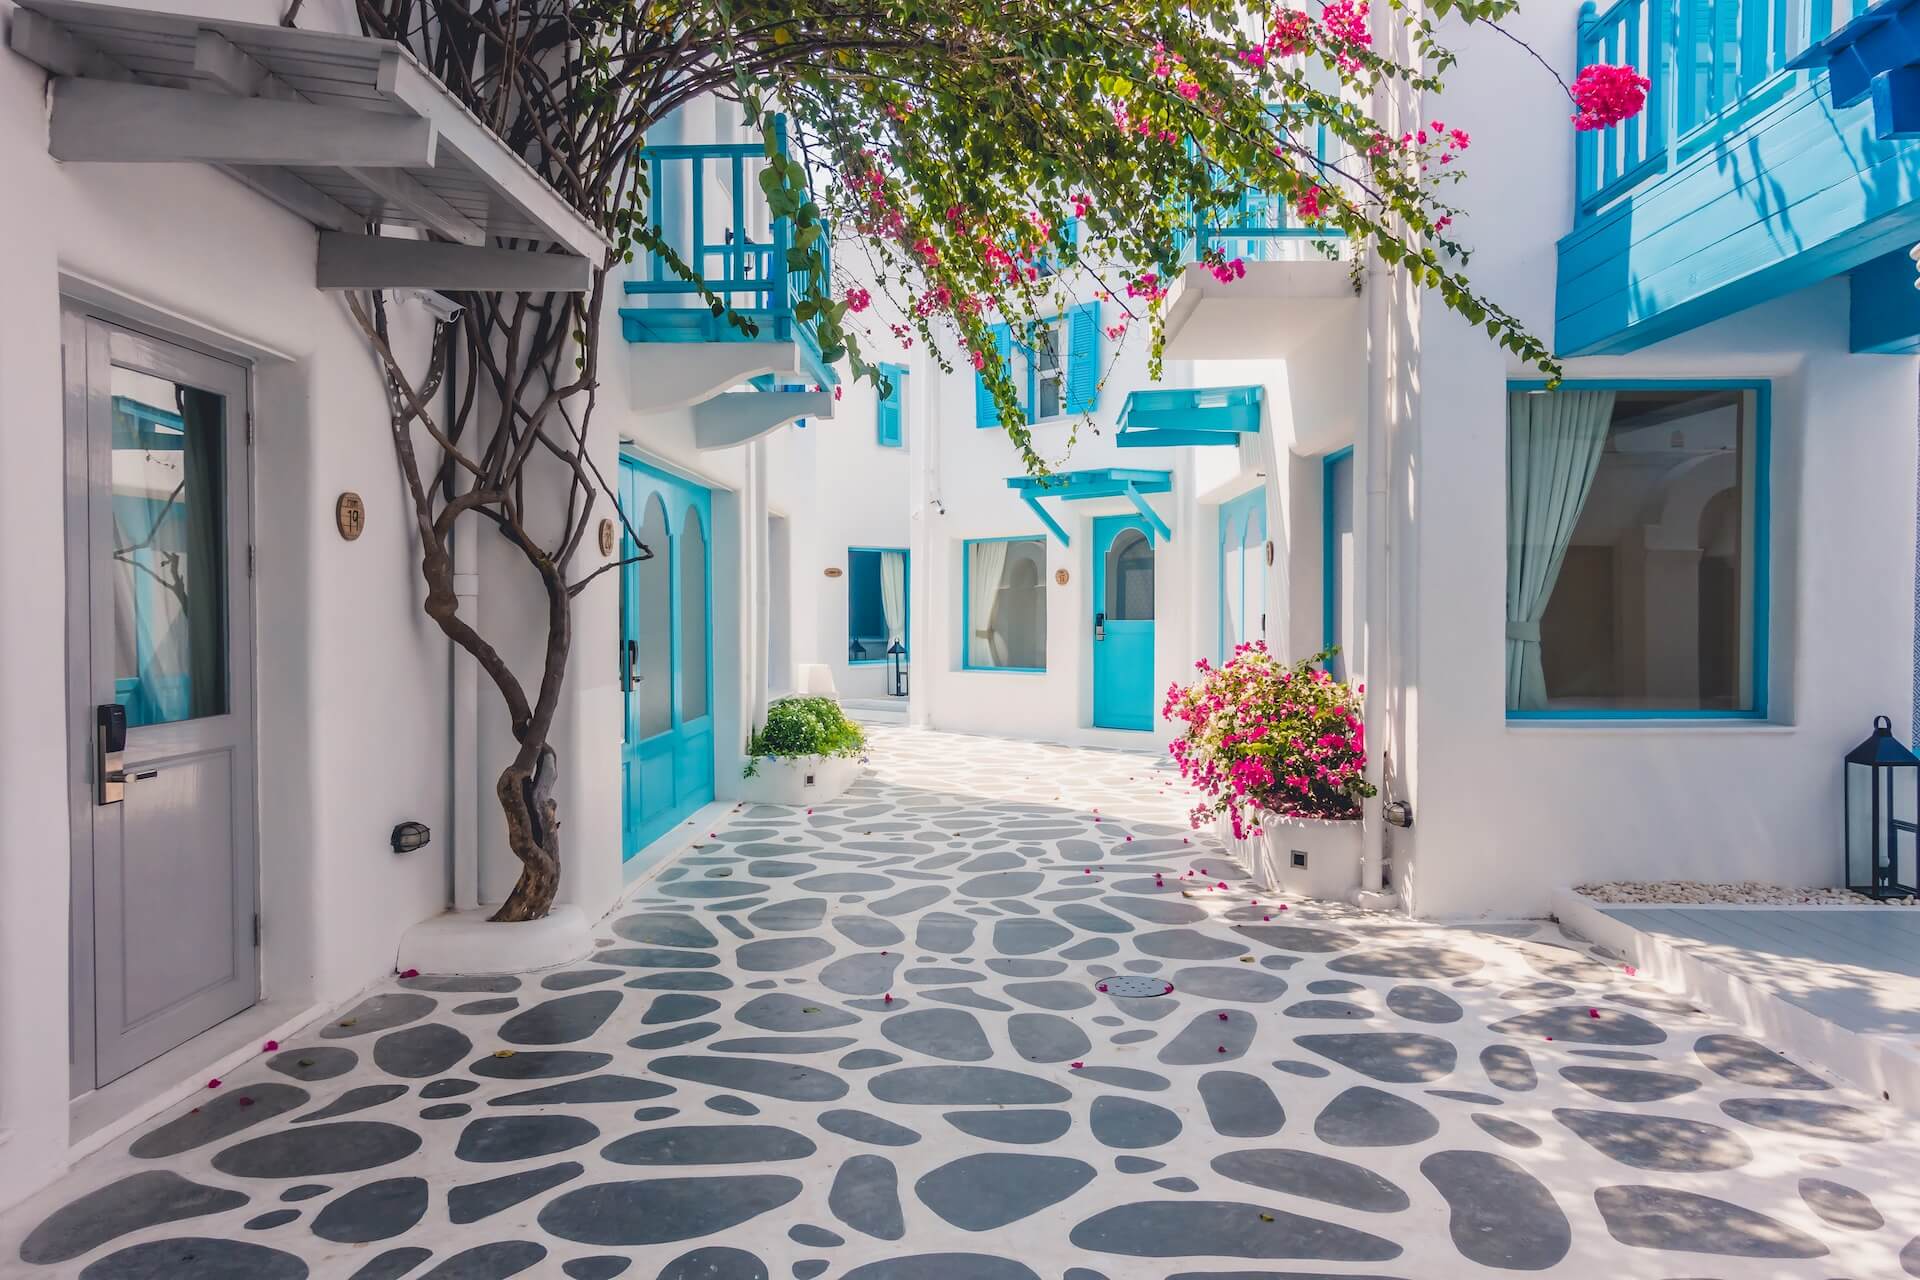 Narrow street in Mykonos town with white houses and blue doors